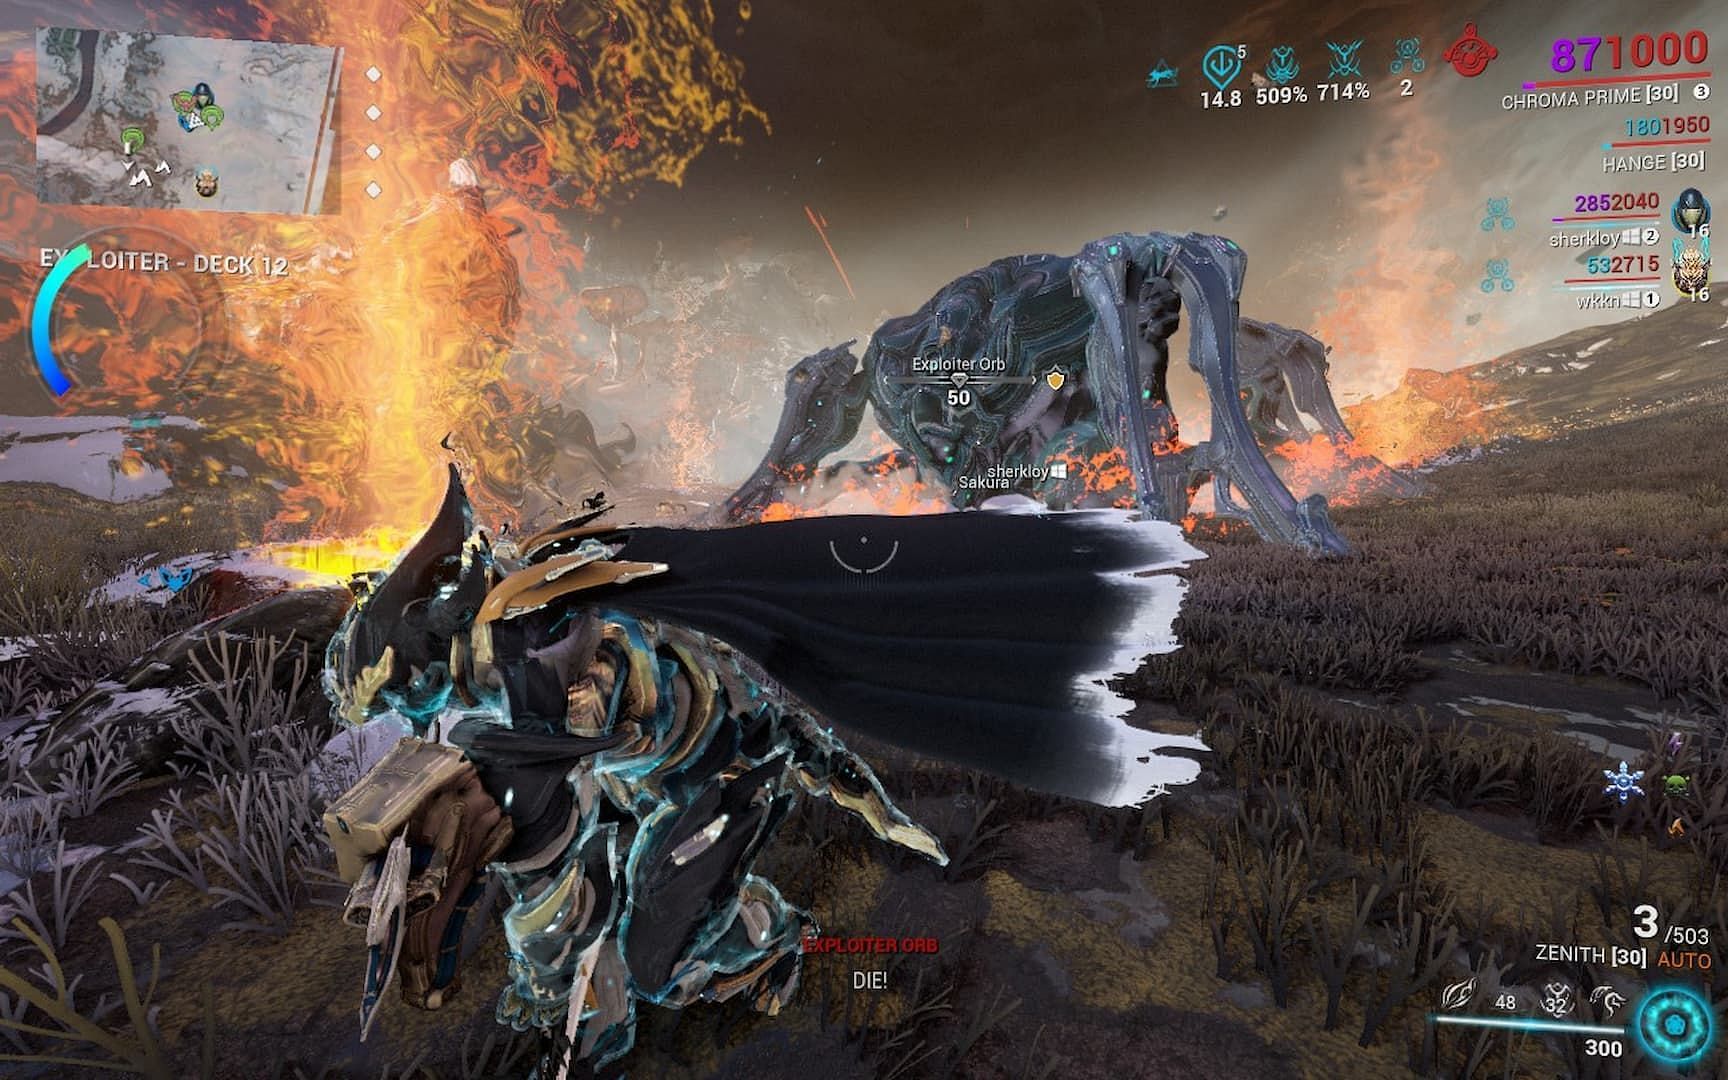 Your Warframe can mount Exploiter Orb to reveal her weak spot once the heat gauge is full (Image via Digital Extremes)